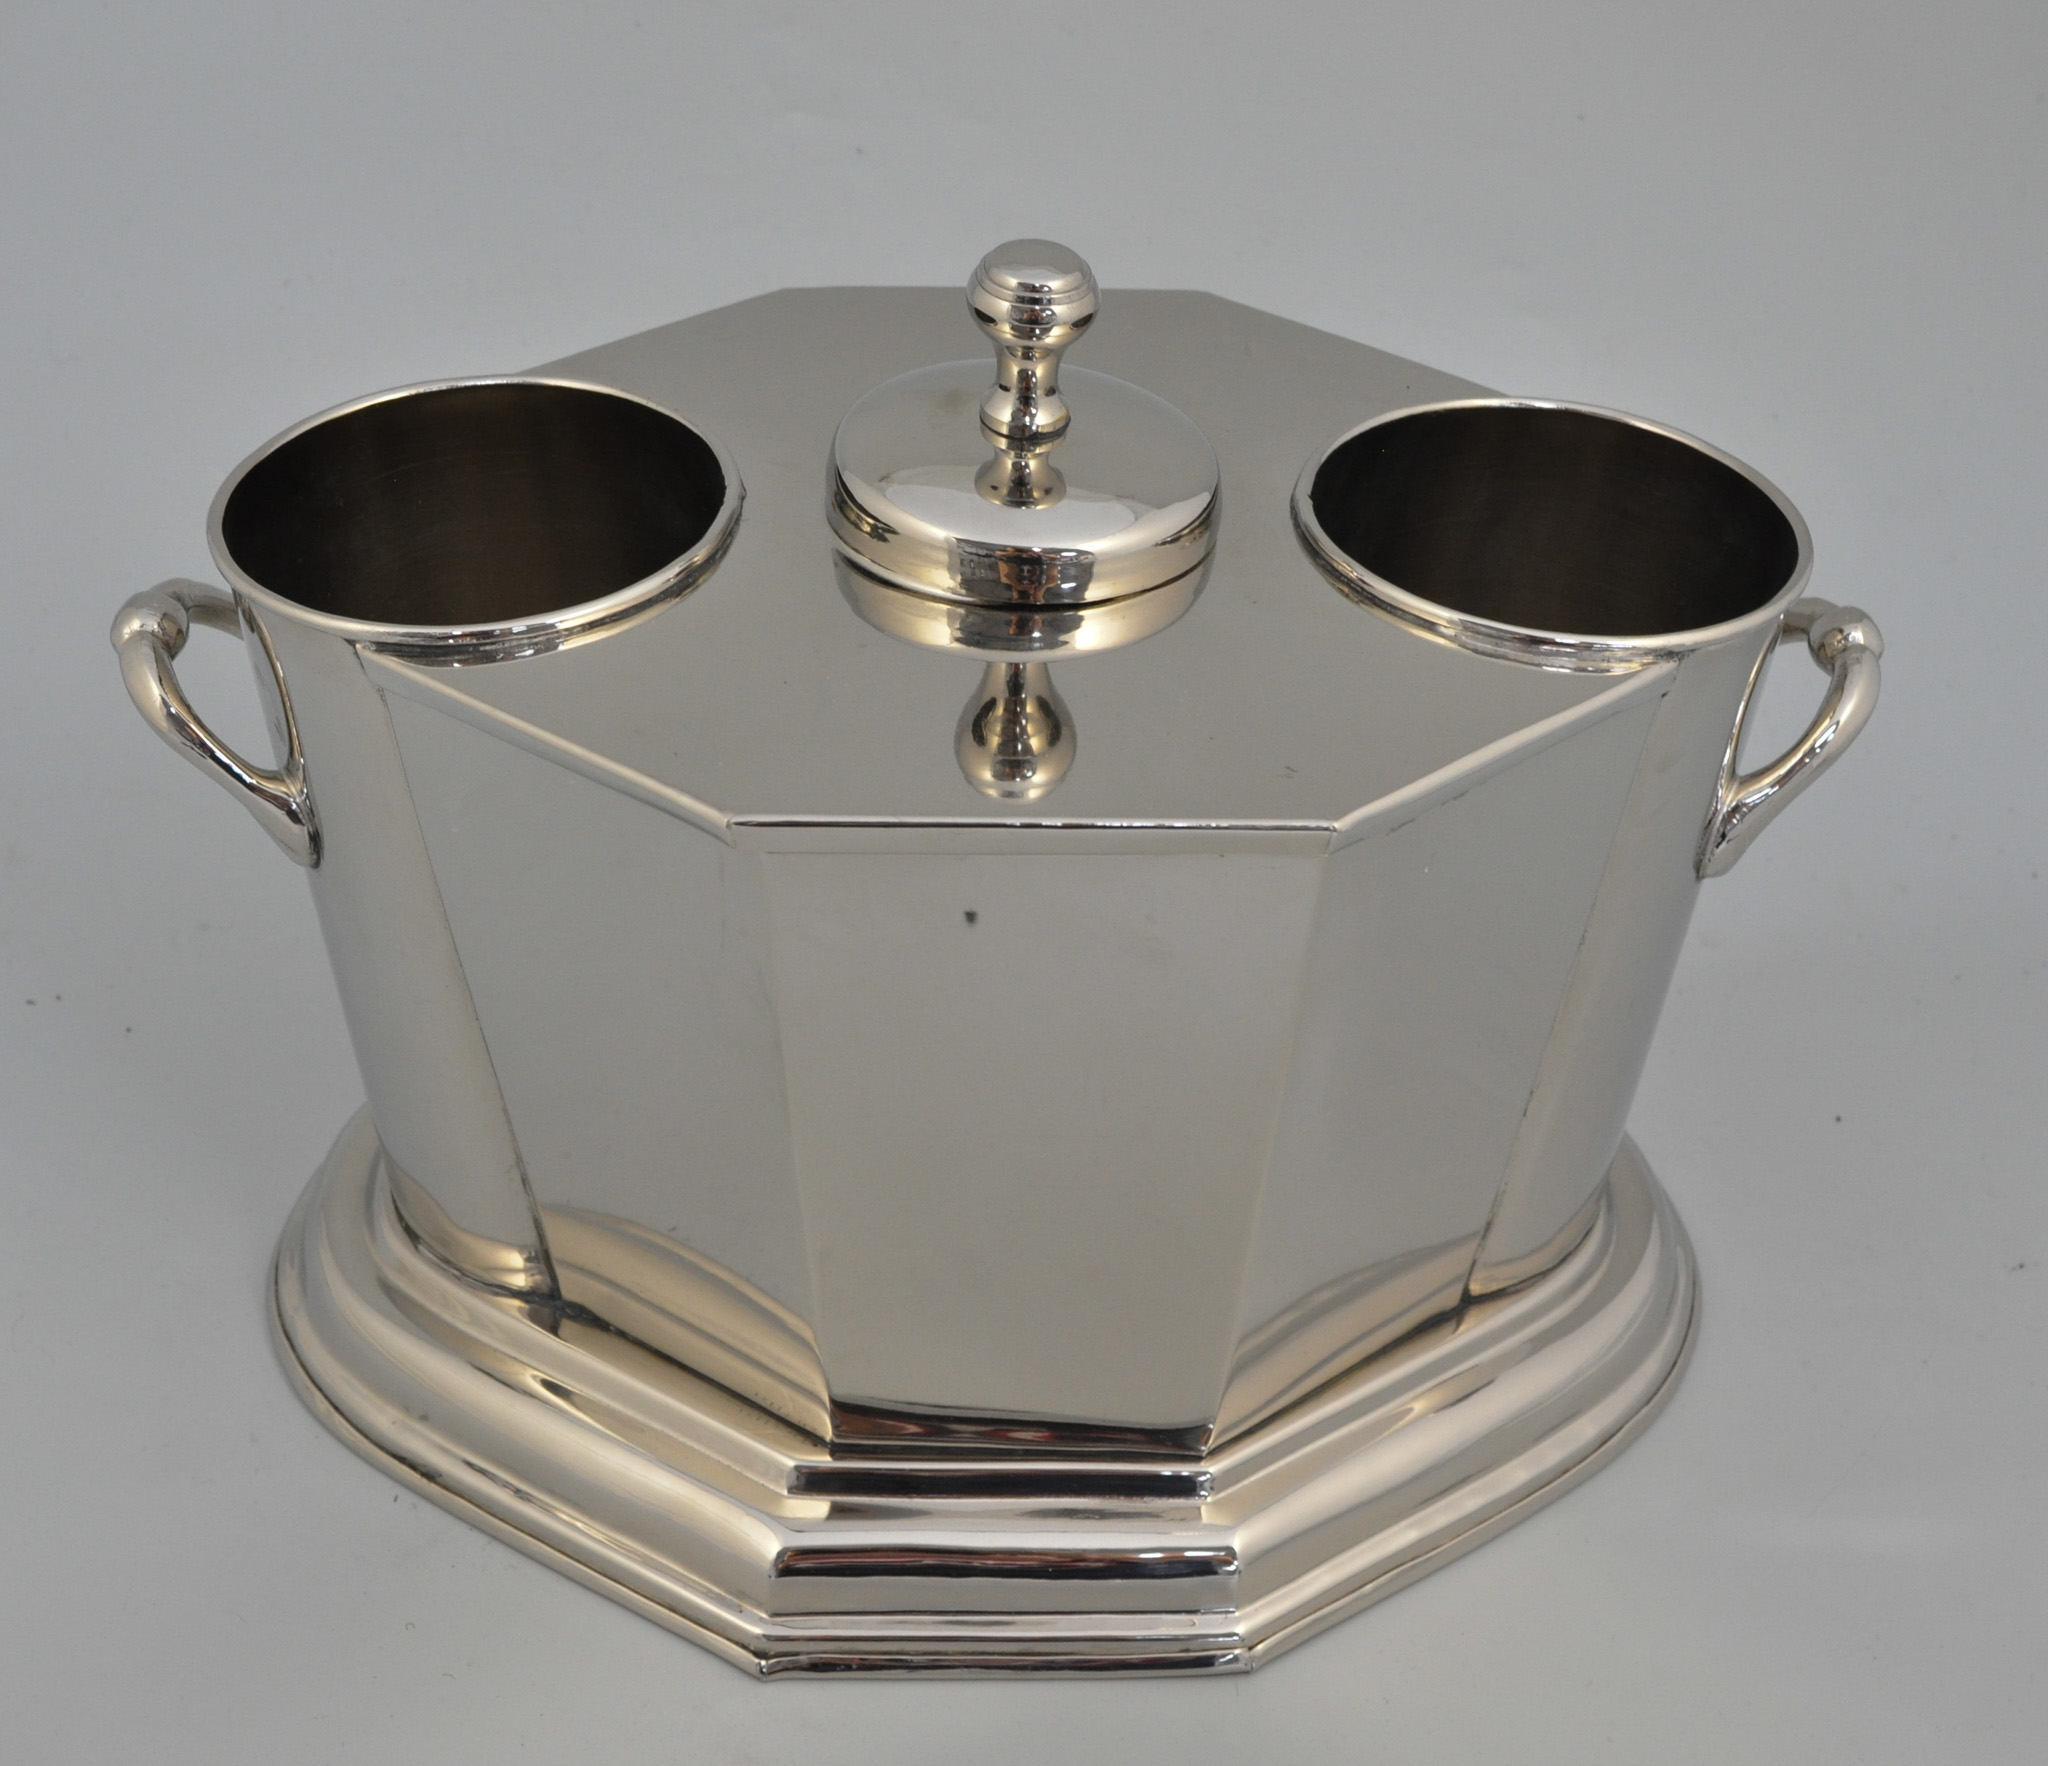 Nickel plated two bottle wine cooler, with handles, length 34cm.